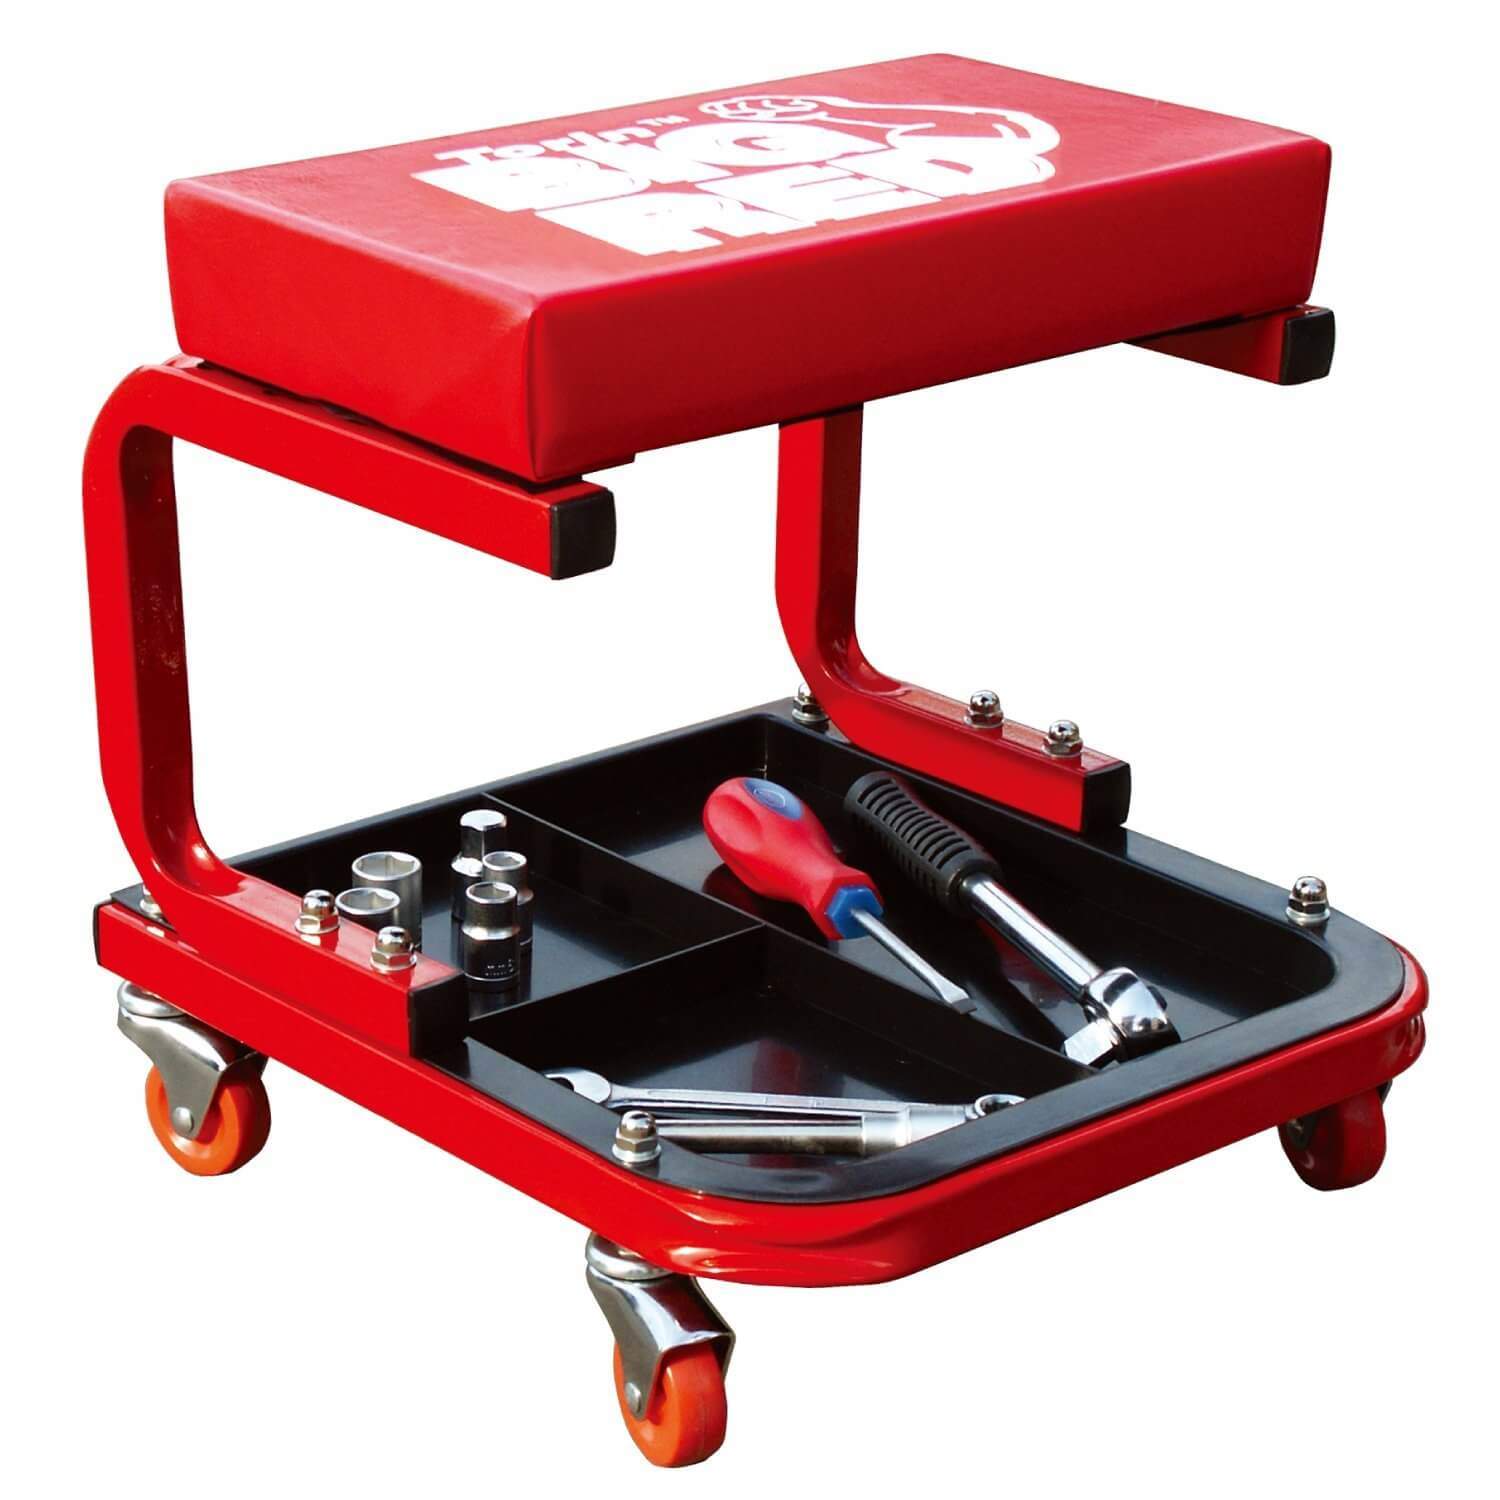 Torin TR6300 Red Rolling Creeper Garage/Shop Seat